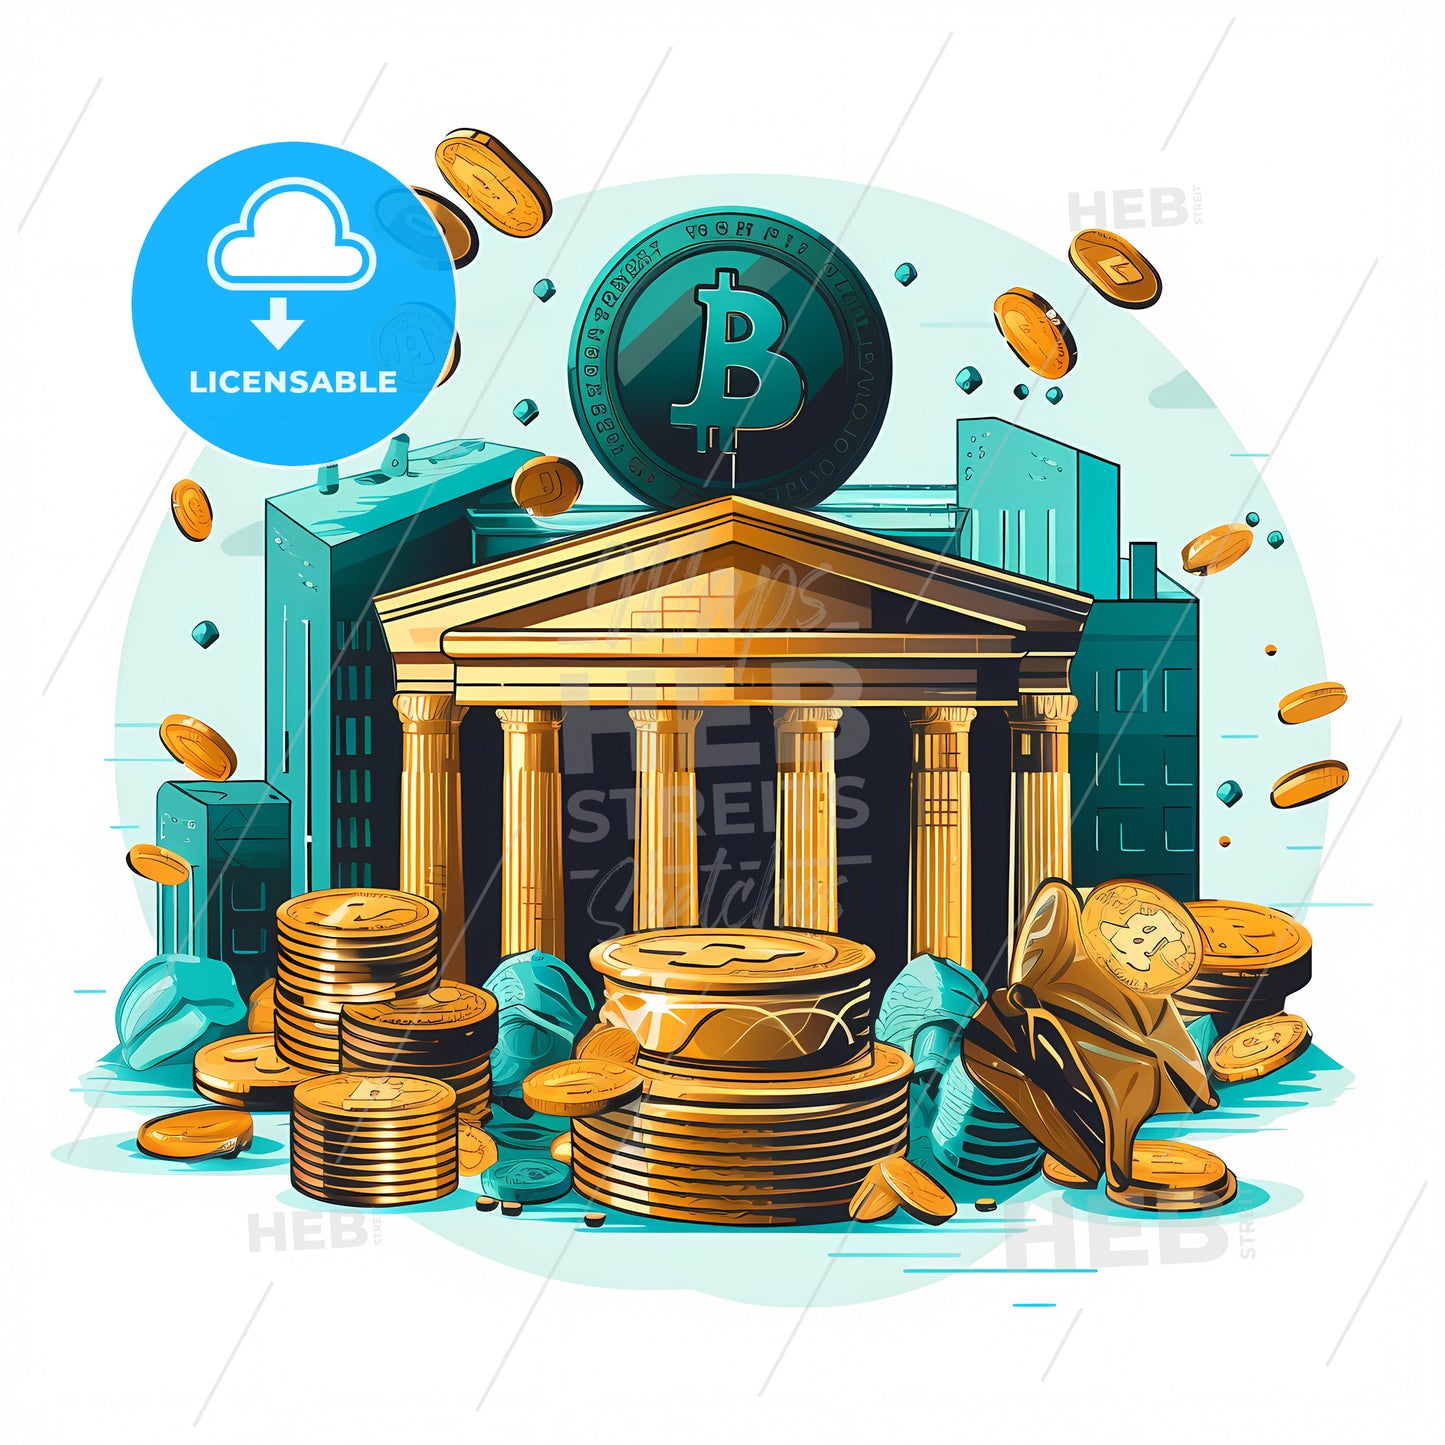 A Clipart Representing The Finance Industry, A Cartoon Of A Building With Columns And Coins